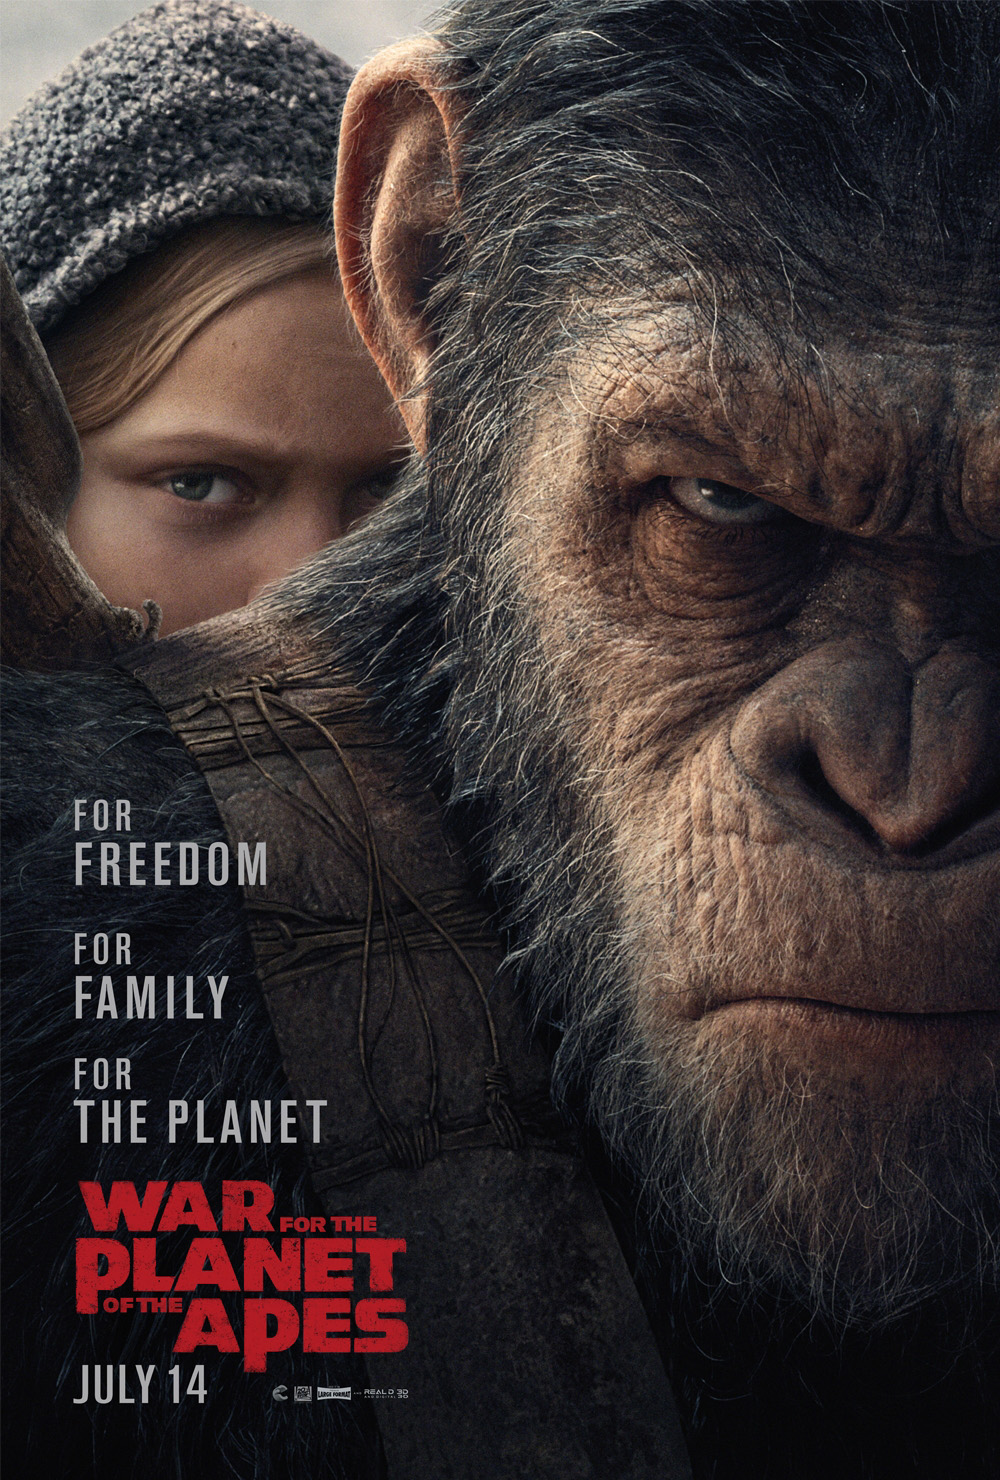 "War for the Planet of the Apes" movie poster. Courtesy of 20th Century Fox.